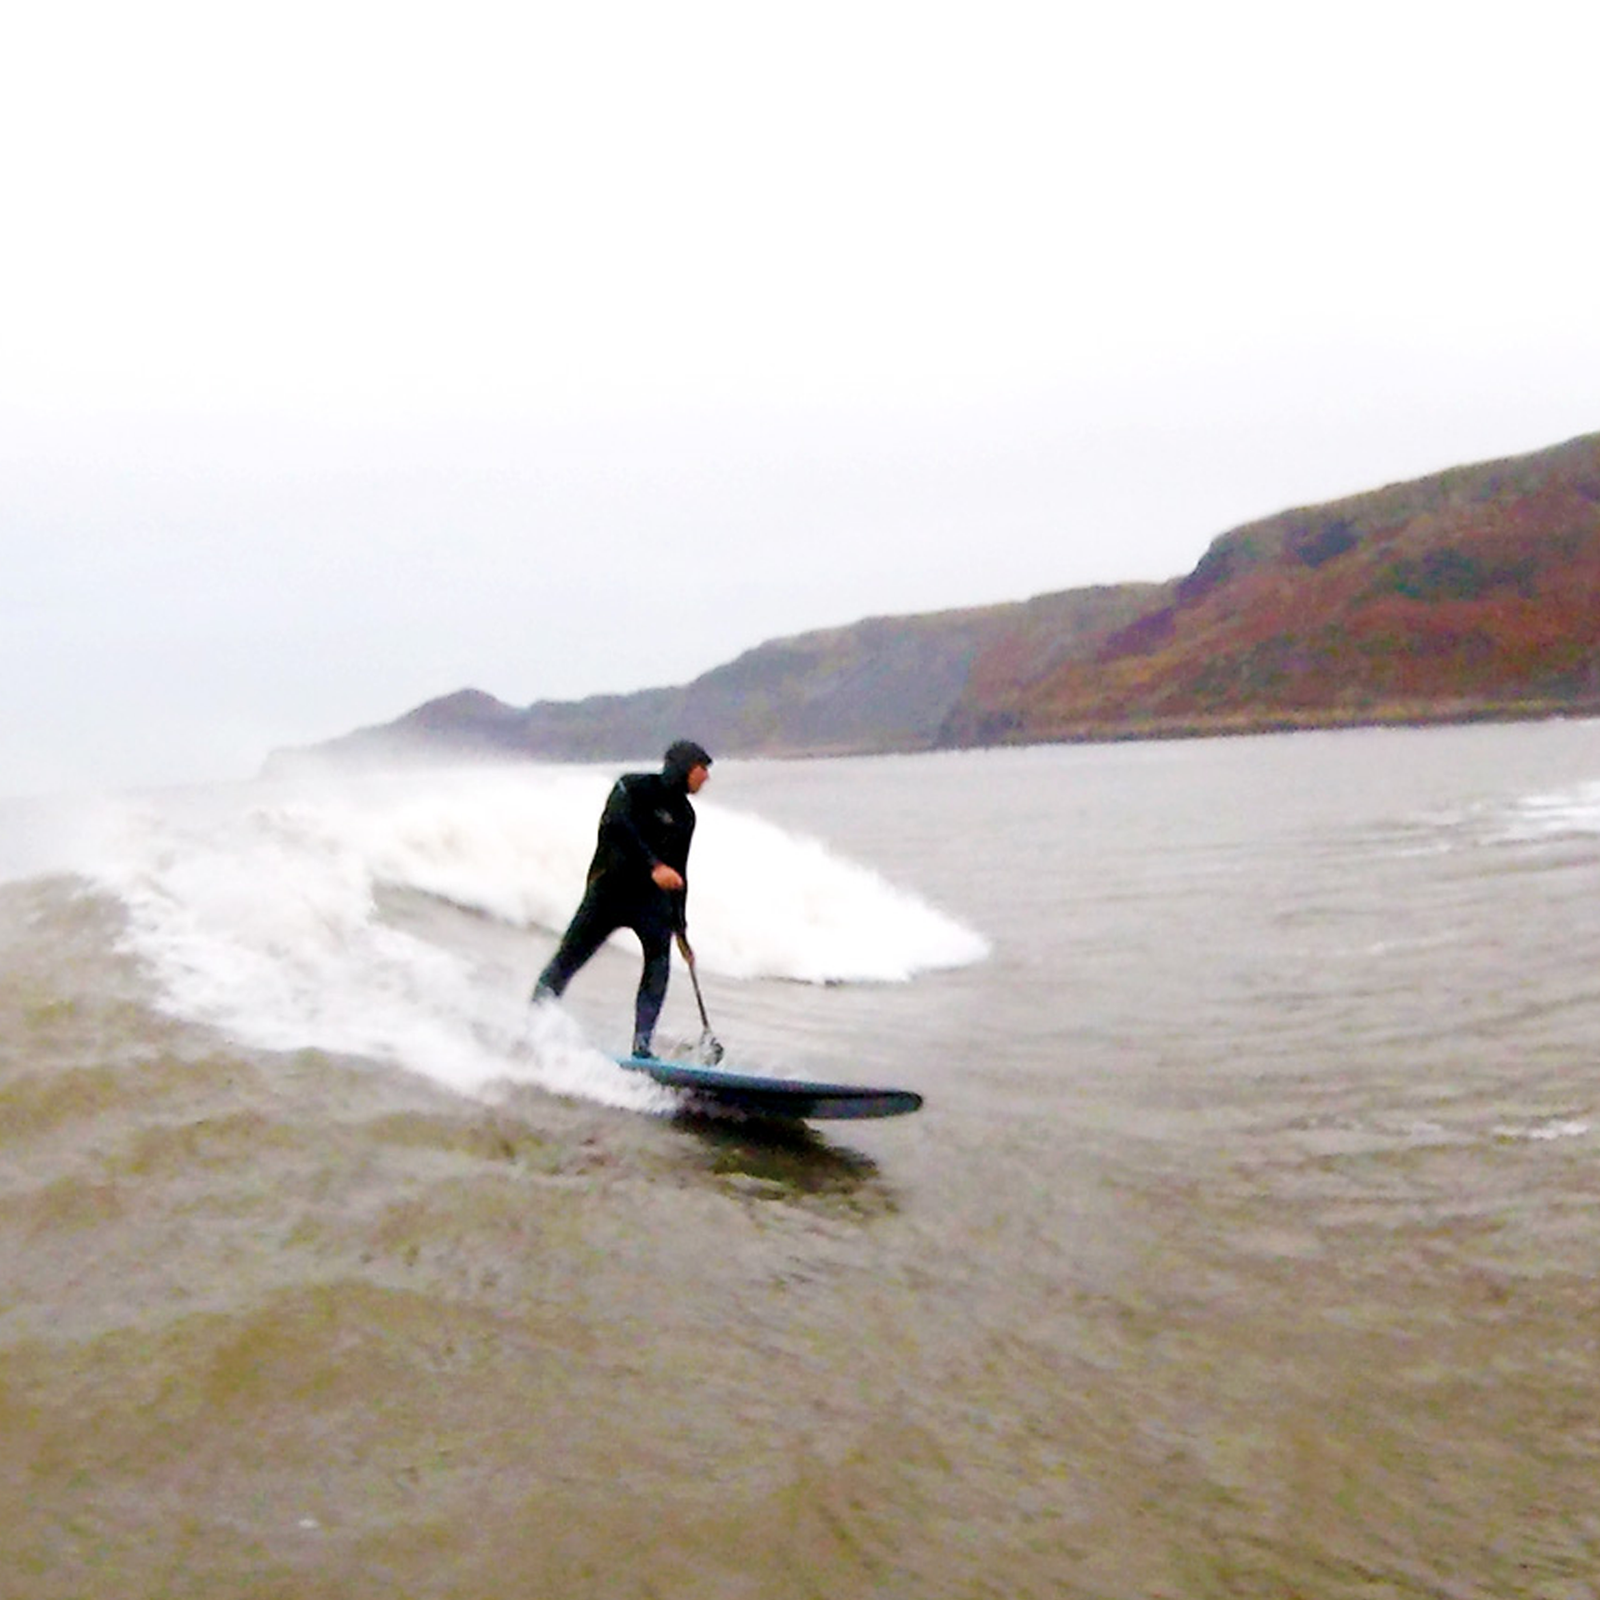 Loco Surfing Demo Day: Saltburn by the Sea Comes Alive